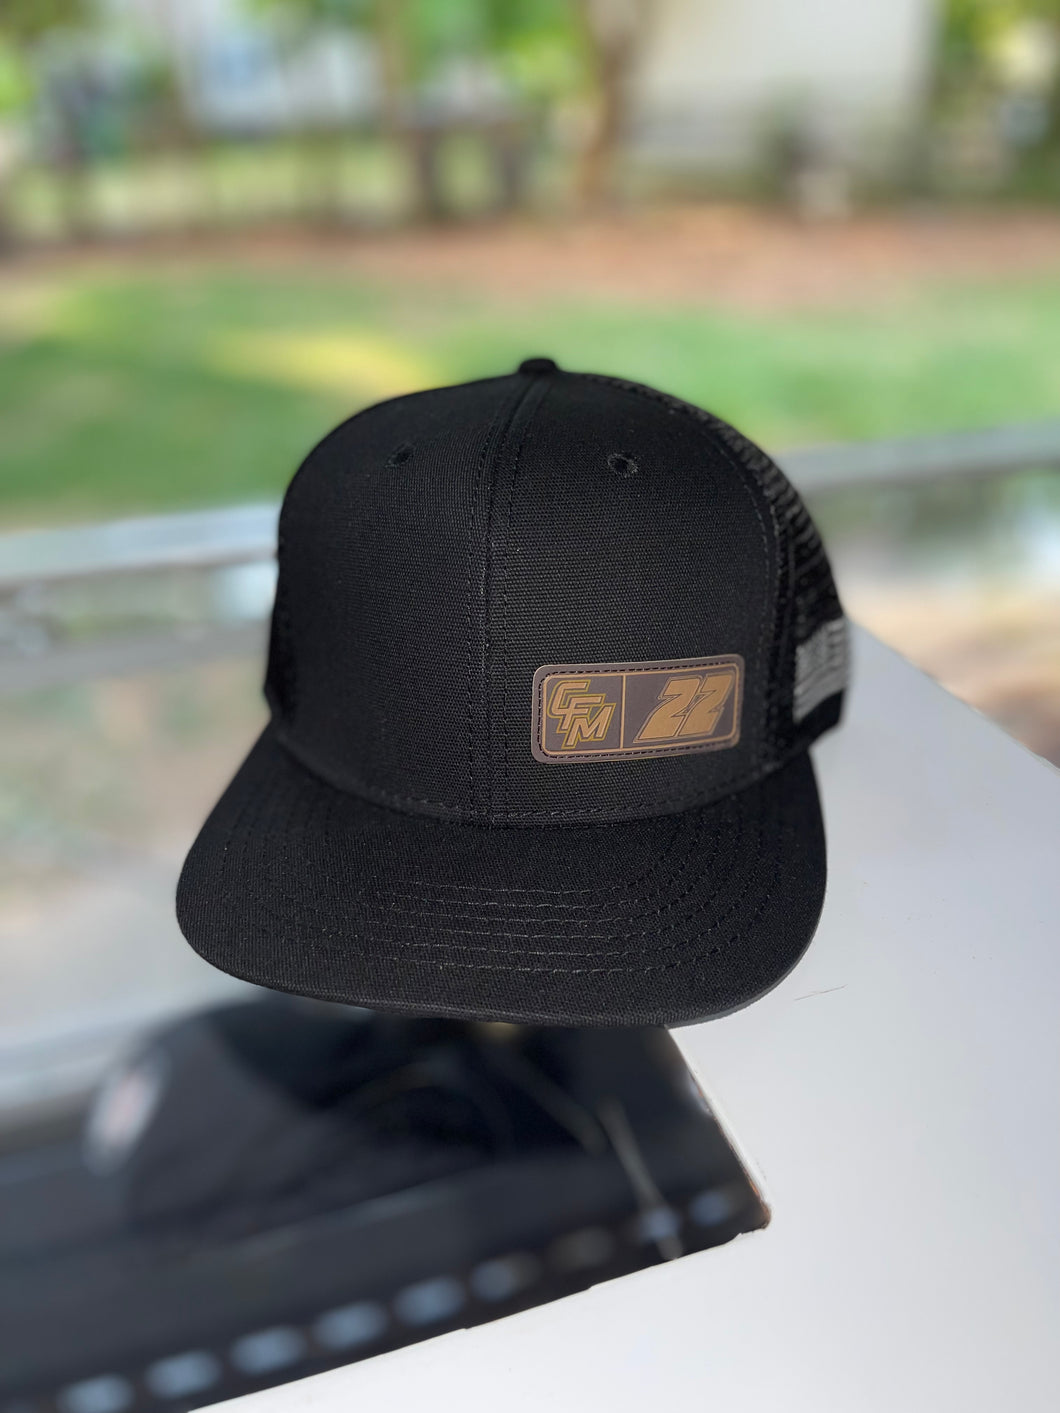 CFM22 Small Leather Patch Hat All Black Summer Edition